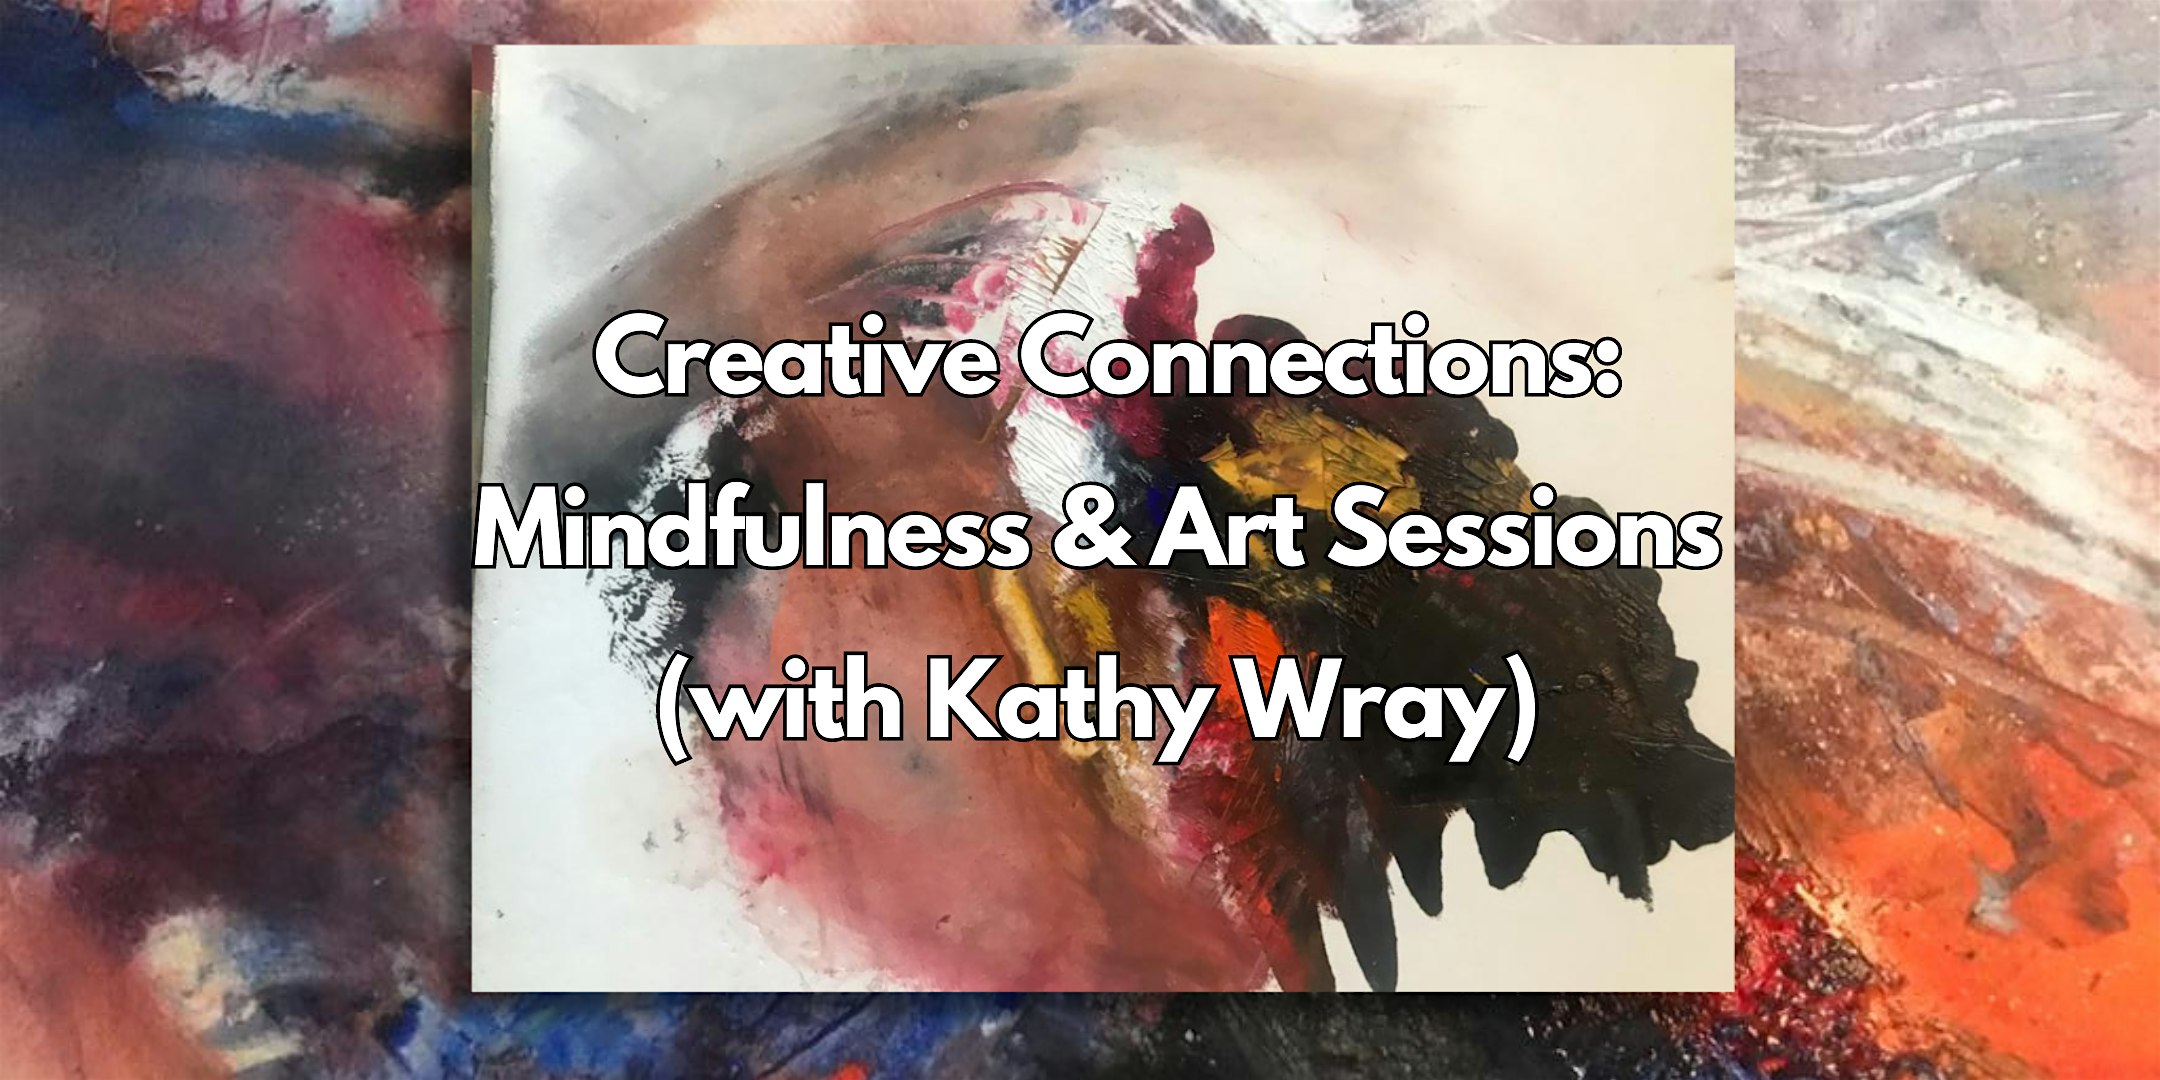 Creative Connections: Mindfulness Art Sessions with Kathy Wray